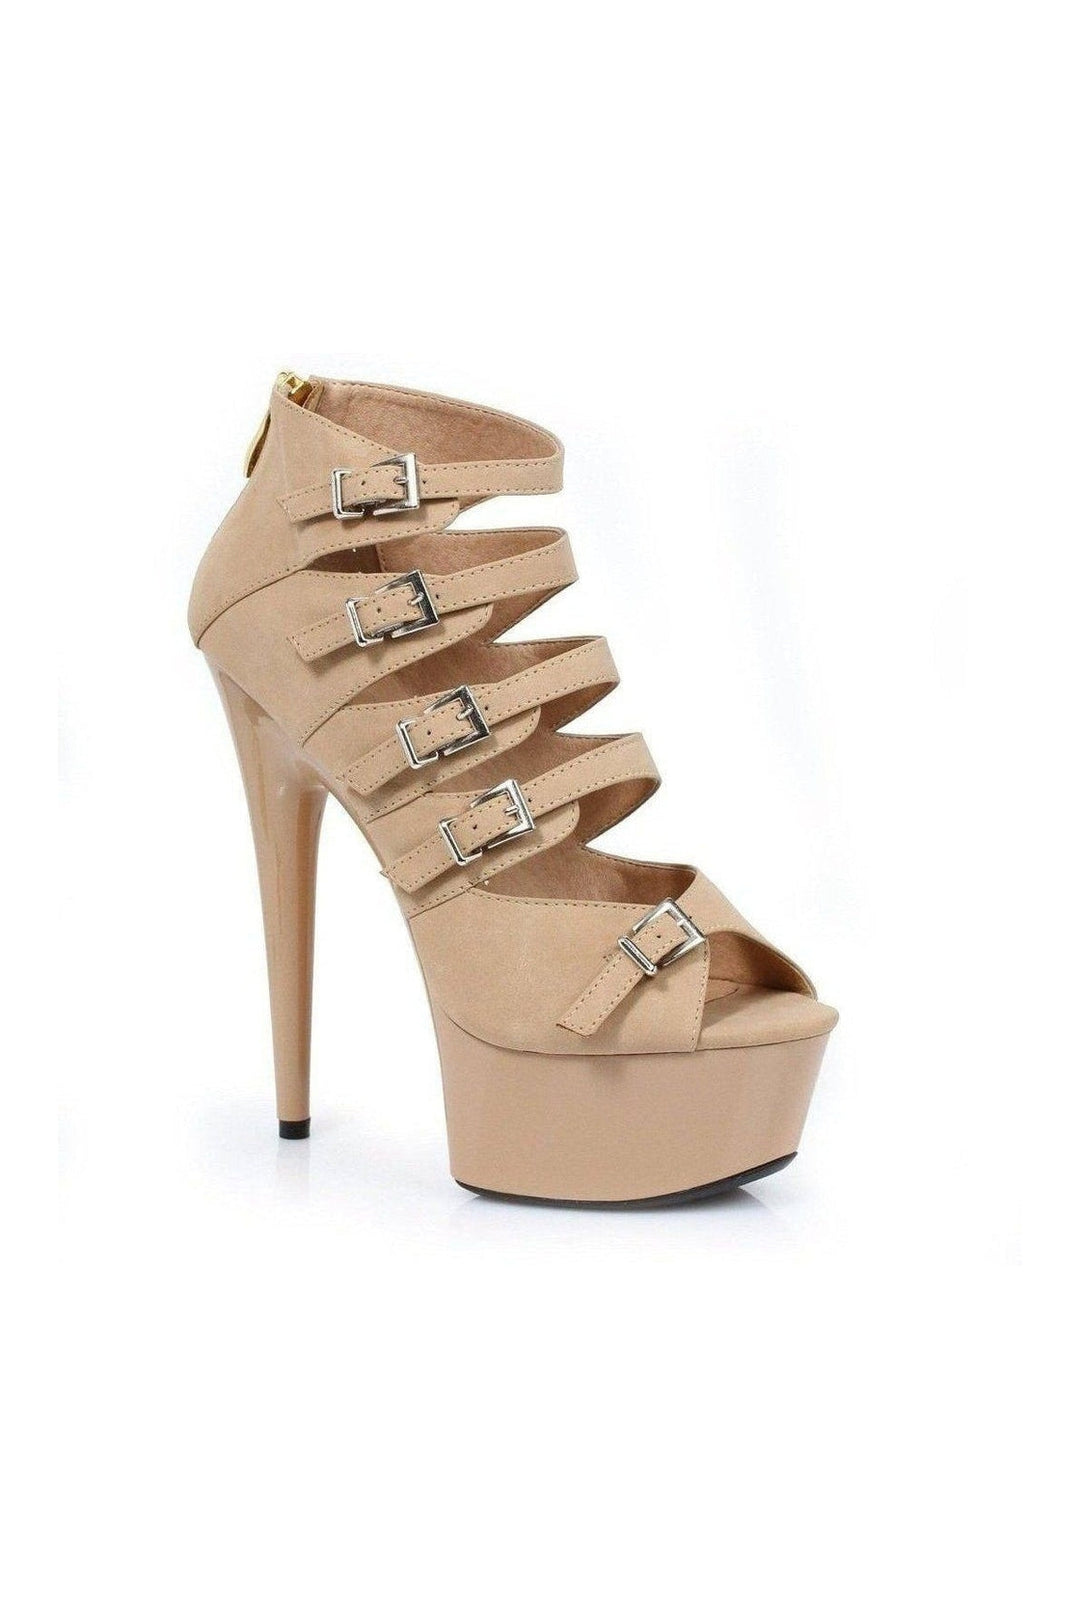 Ellie Shoes Nude Ankle Boots Platform Stripper Shoes | Buy at Sexyshoes.com